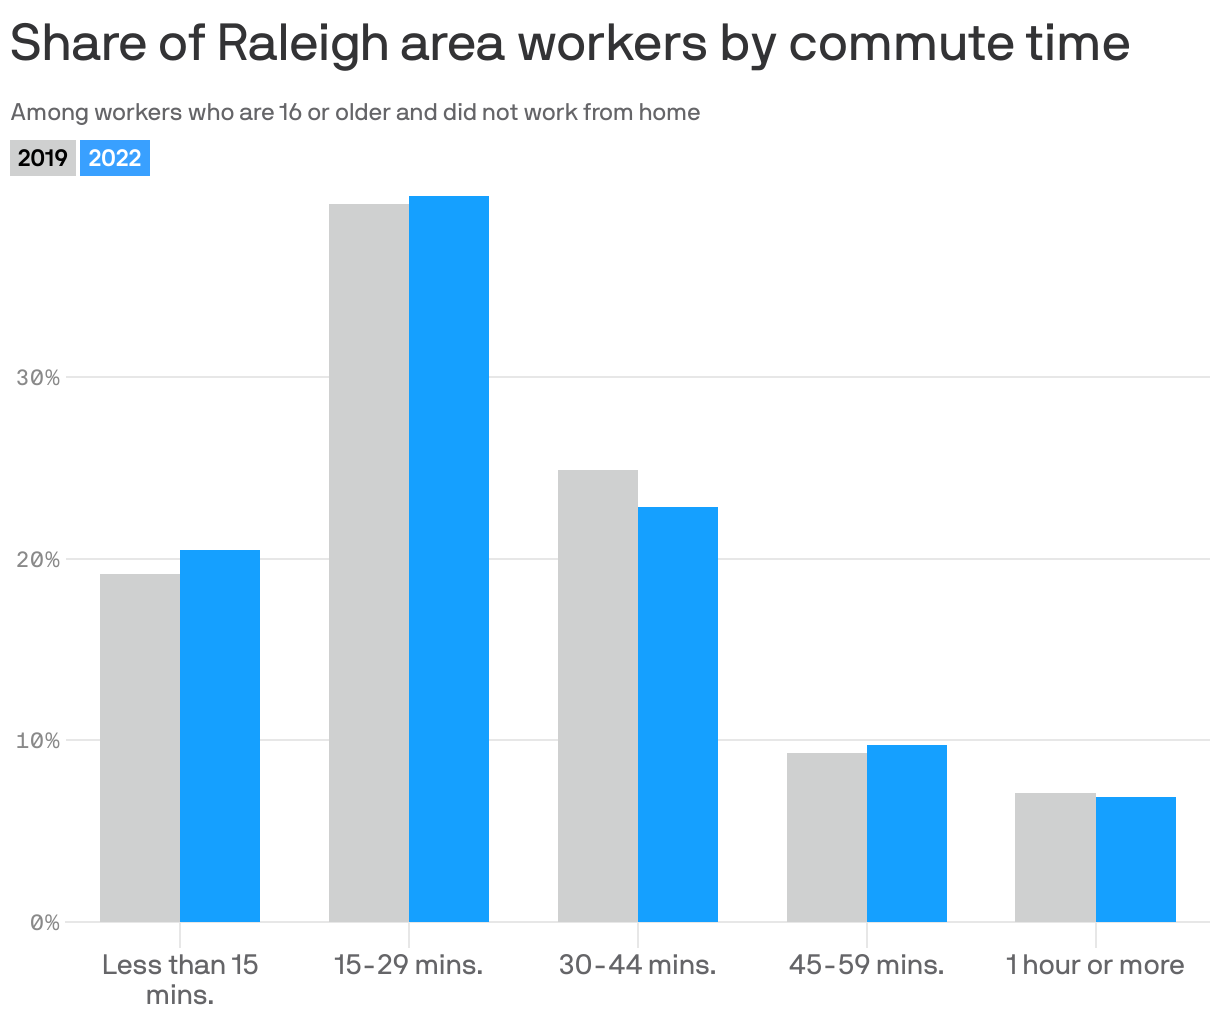 Share of Raleigh area workers by commute time